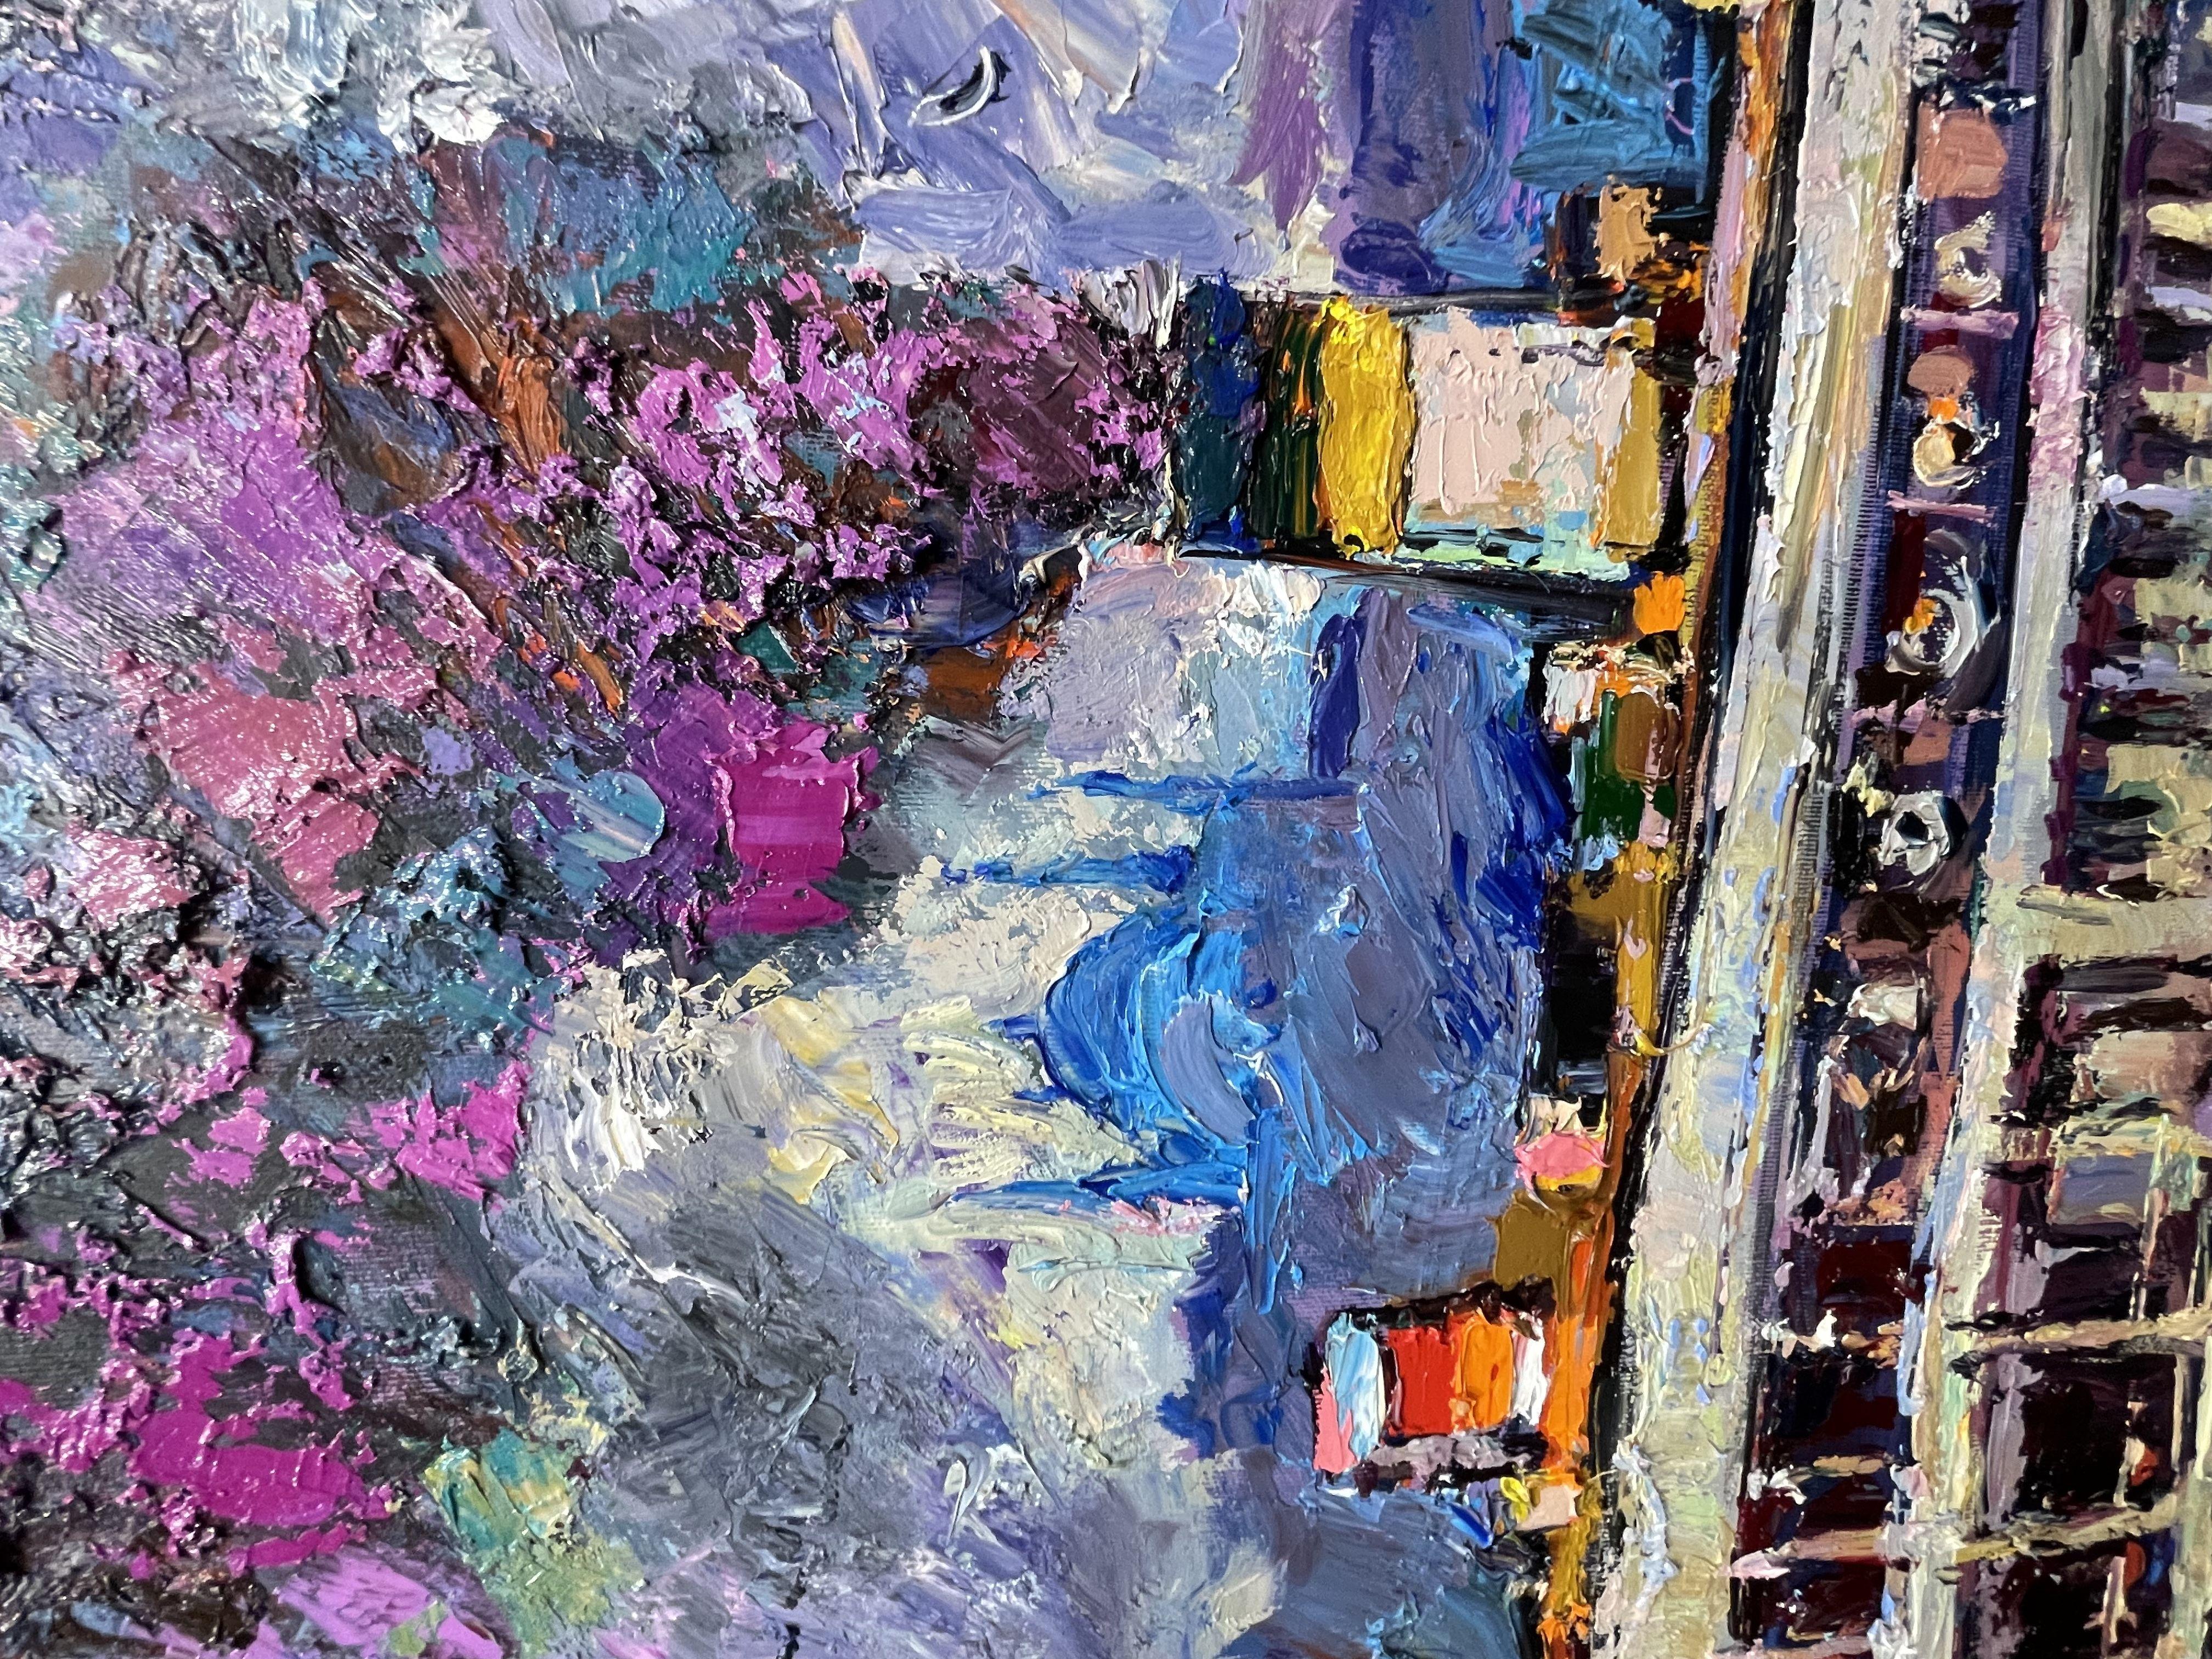 This work of art (Galata bridge) is a one-of-a-kind bright colorful canvas. I make really bright colors. I painted in the free style of the Impasto Impressionists.    Painted with high quality oil paints on artistic stretched canvas, this painting